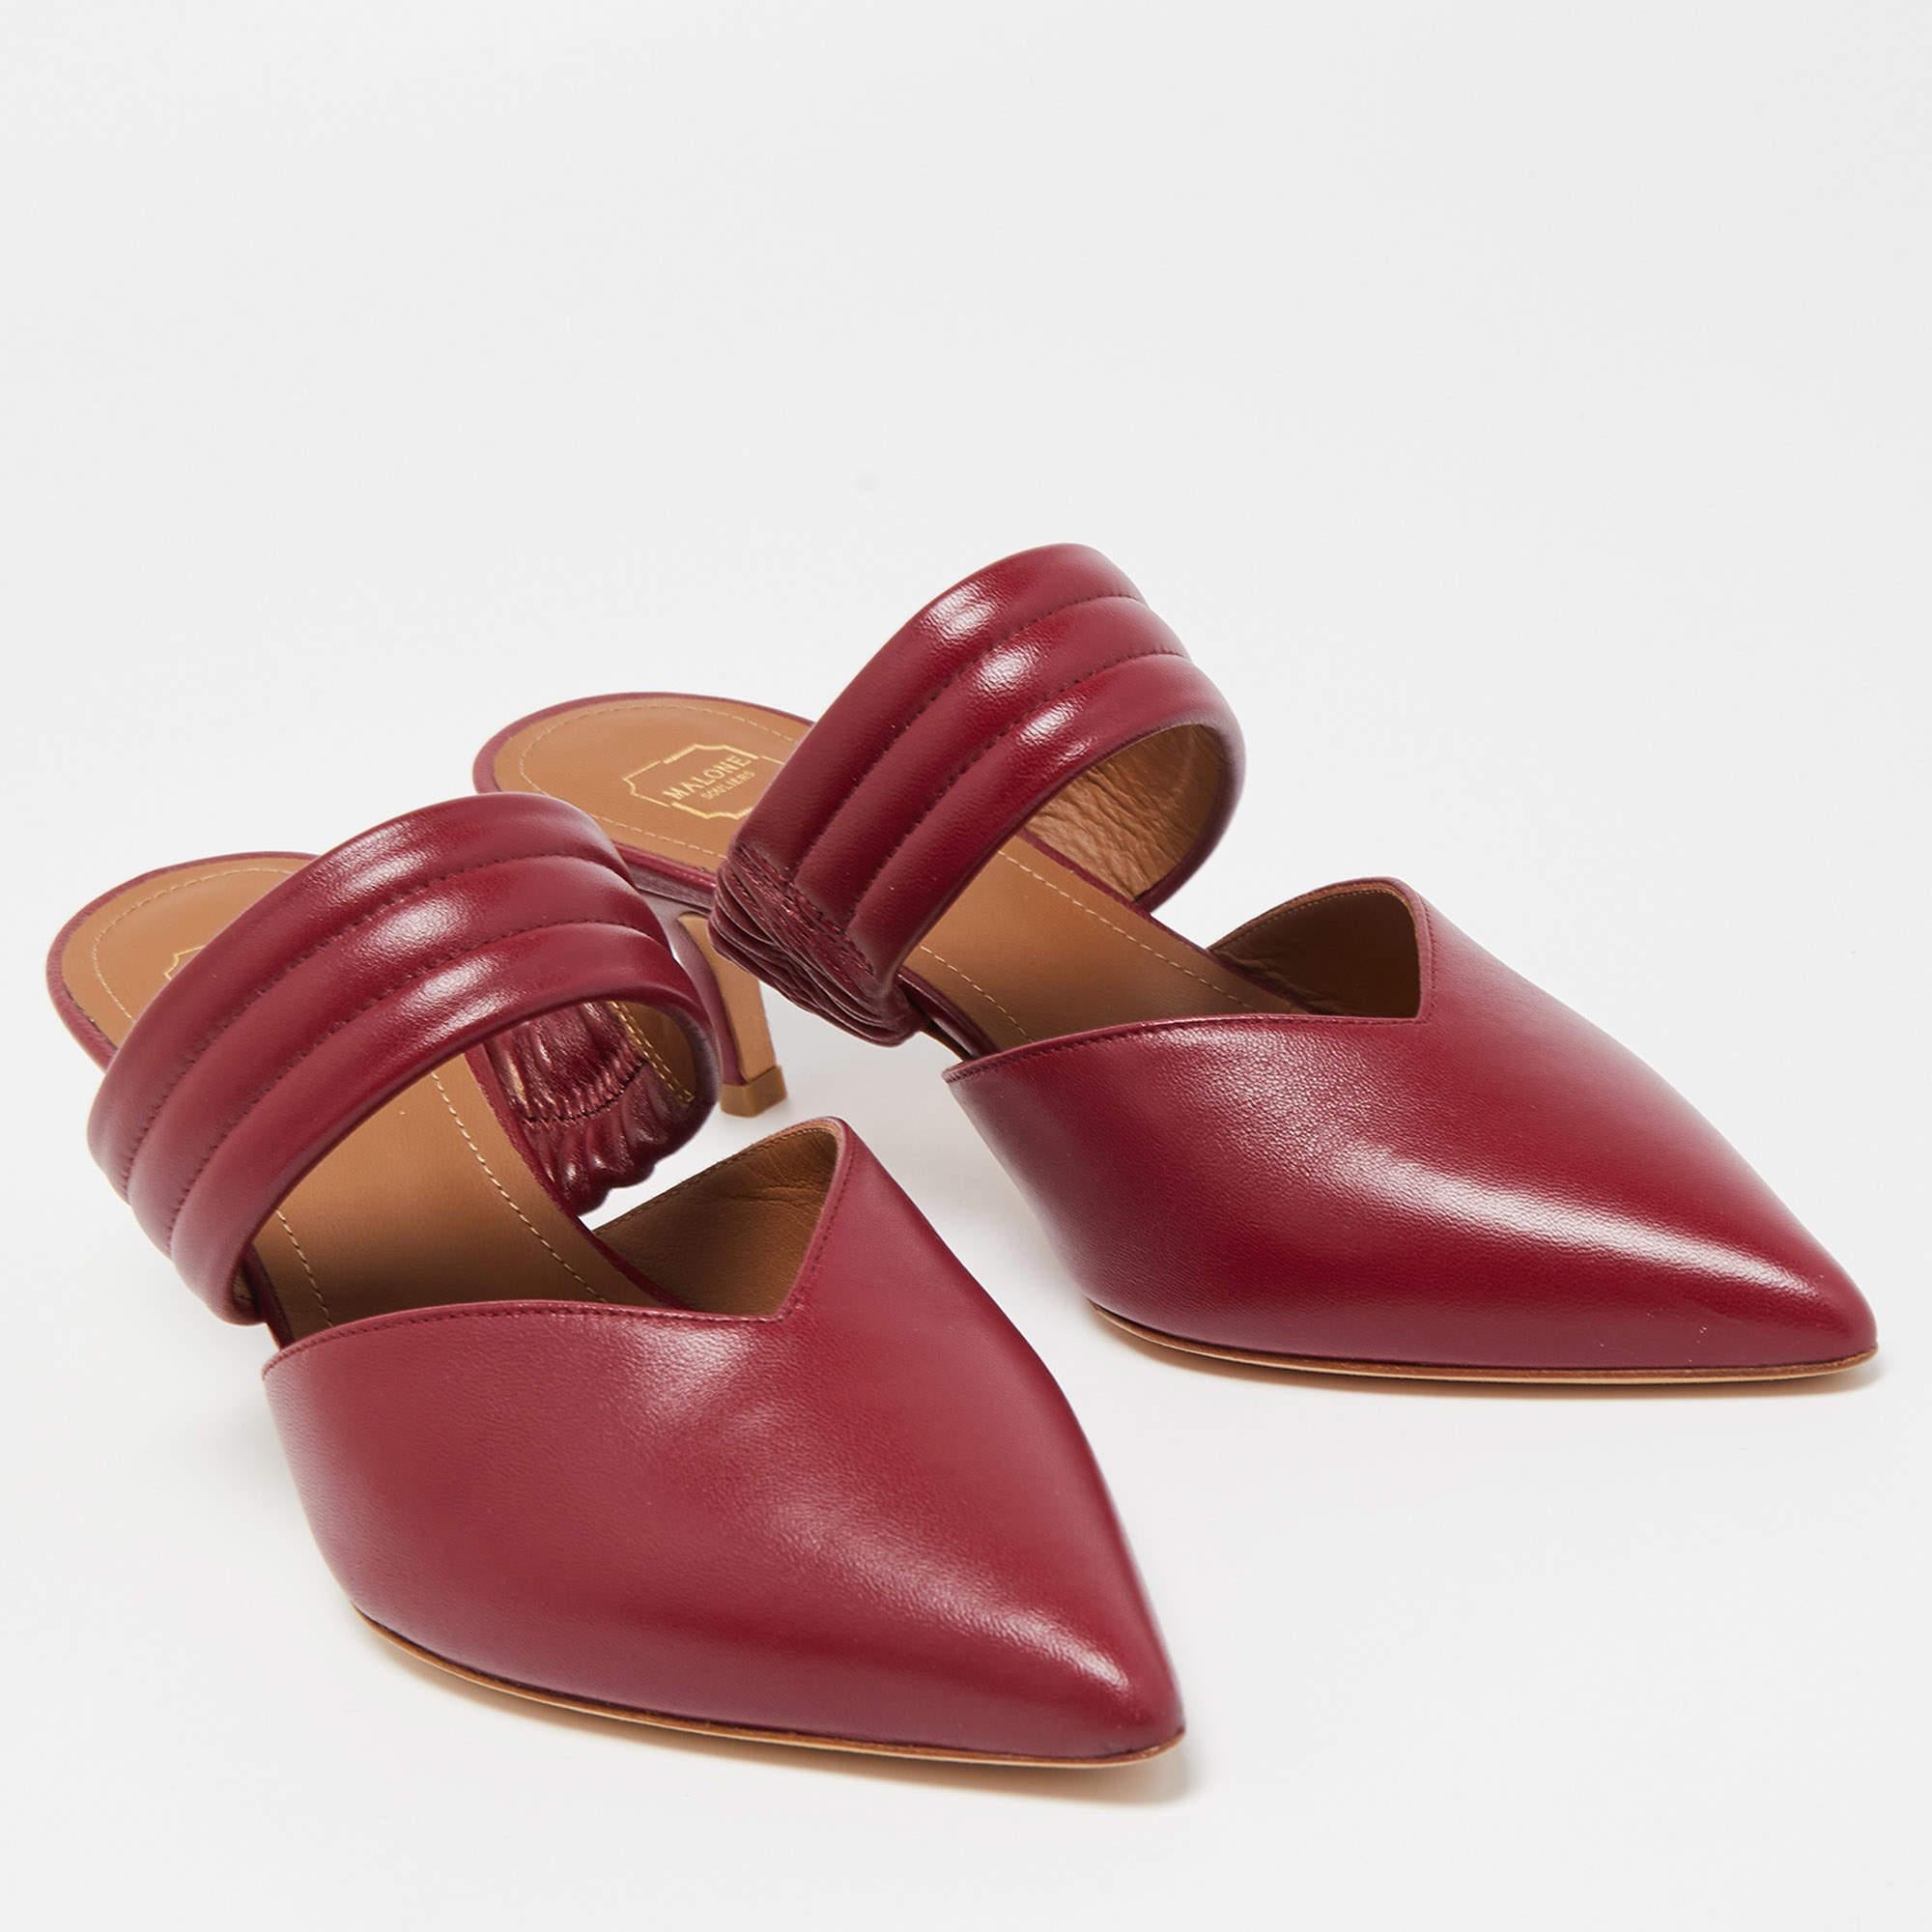 Malone Souliers Burgundy Leather Mathilda Mules Size 35.5 In New Condition For Sale In Dubai, Al Qouz 2